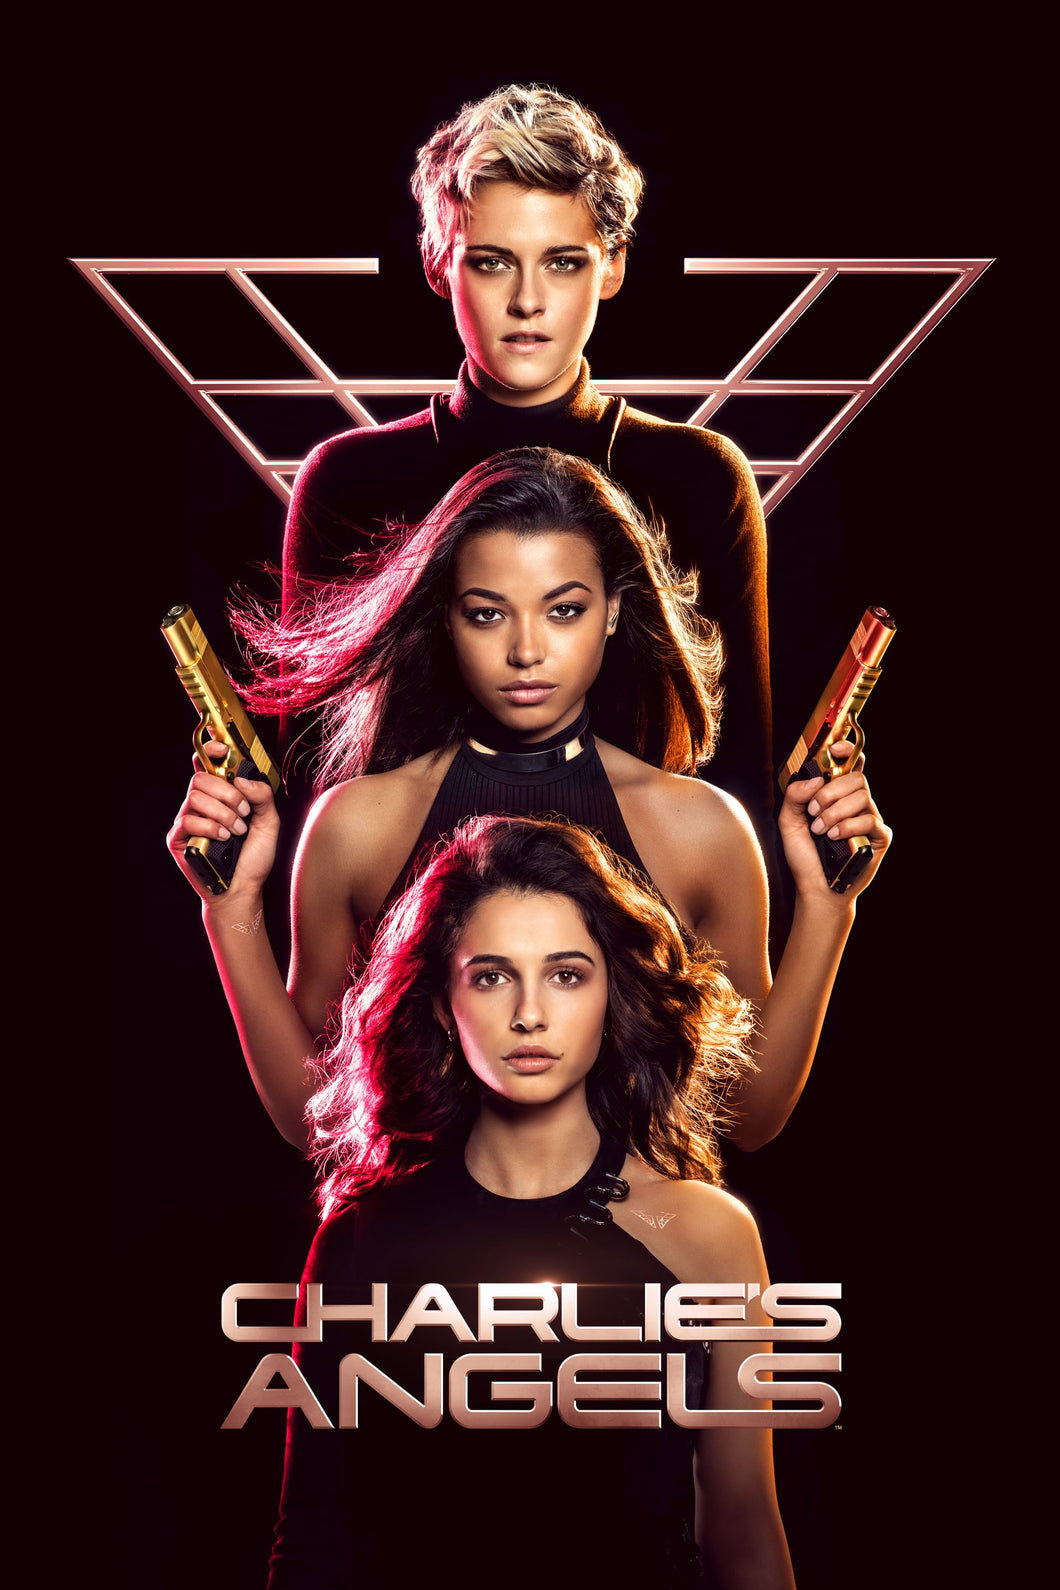 Charlie's Angels (2019) Movie Poster Framed or Unframed Glossy Poster Free UK Shipping!!!